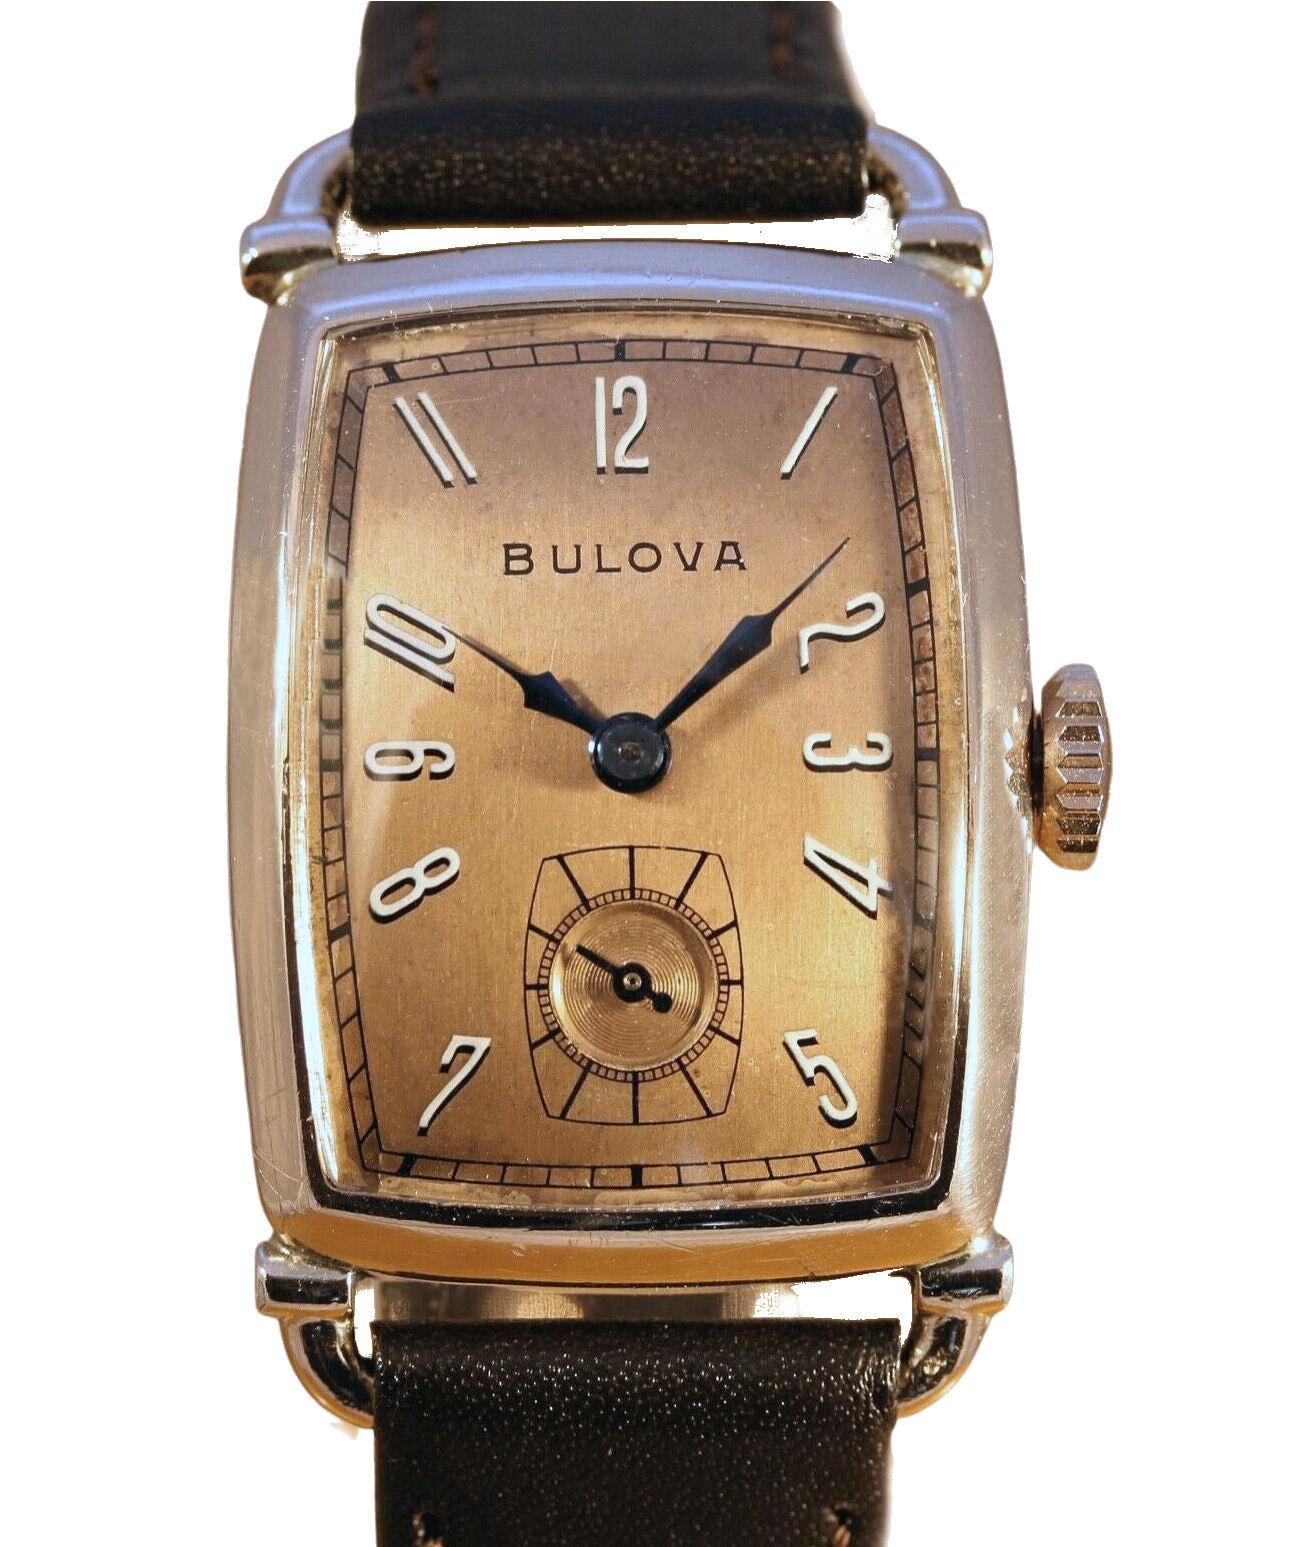 For your consideration is this fabulously stylish Art Deco Gents 1943 BULOVA Gents Watch .Very good vintage condition throughout. The dial is the real hero of this watch and any Art Deco fan will appreciate the numerals which can't be mistaken for